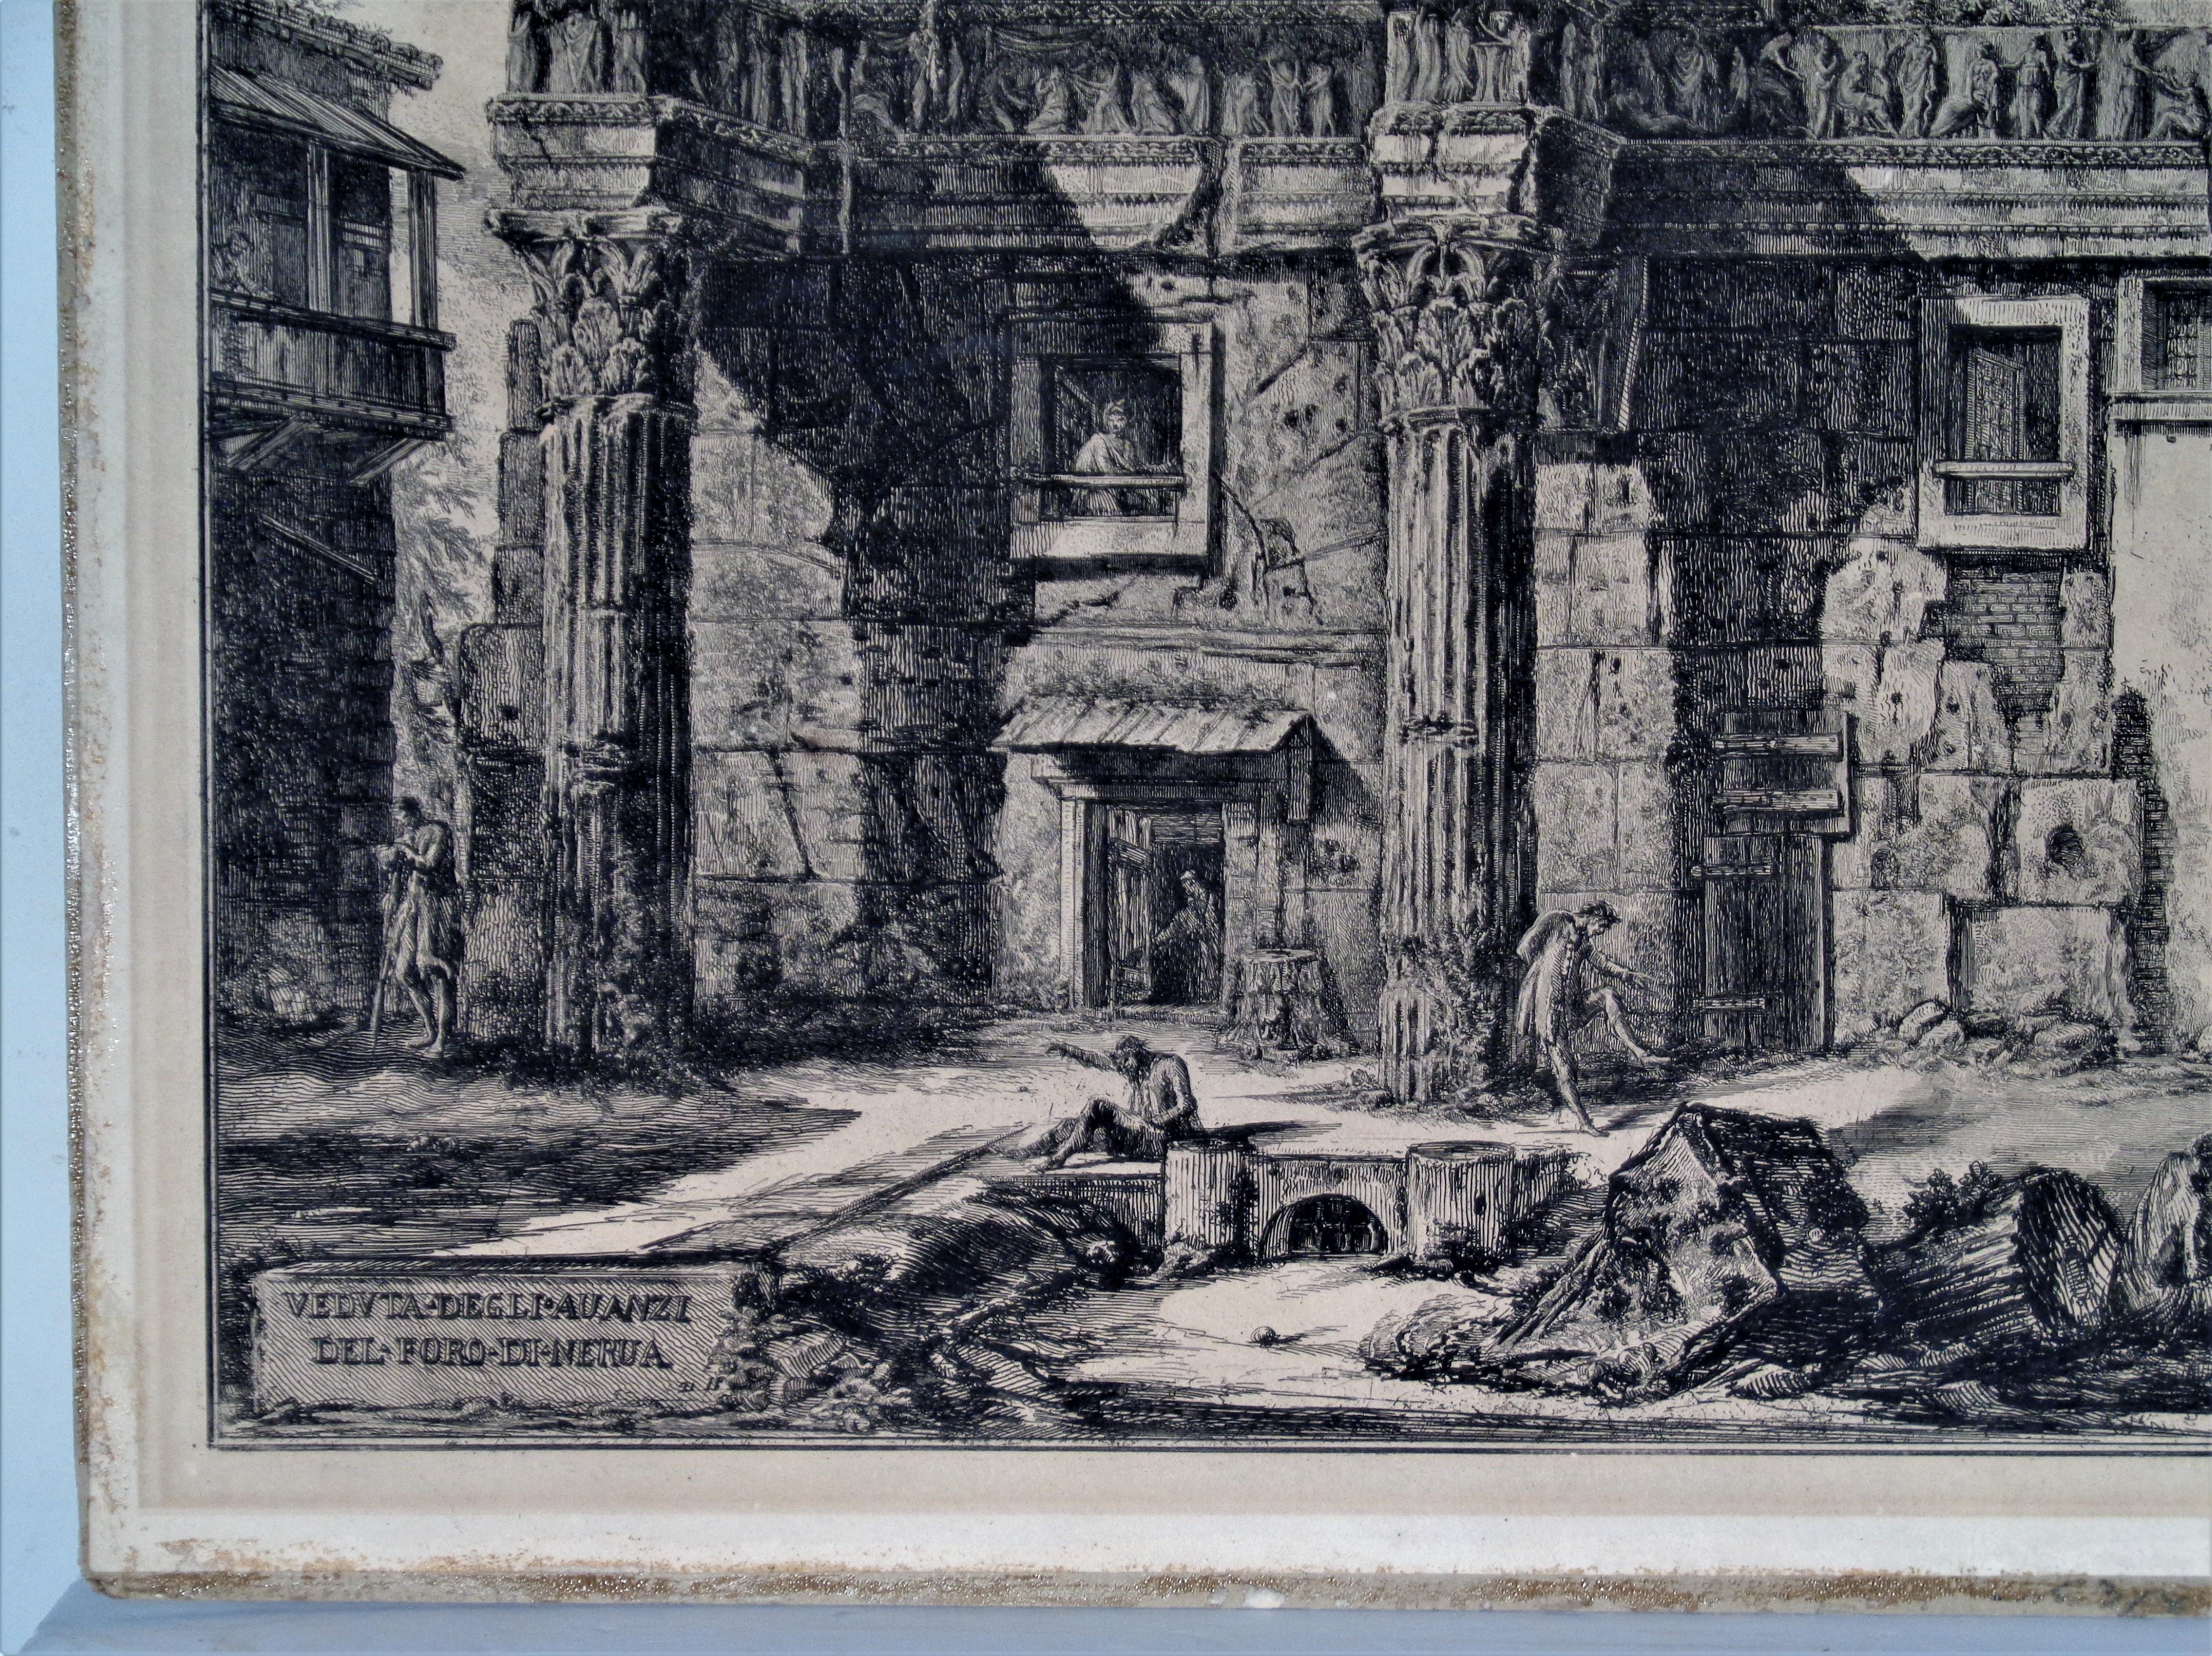 The Forum of Nerva with the Two Half-Buried Corinthian Columns, from Views of Rome, after Giovanni Battista Piranesi ( Italian, 1720-1778 ) by Francesco Piranesi, circa 1800. Etching on heavy ivory laid paper. This sheet measuring 20 3/4 inches high